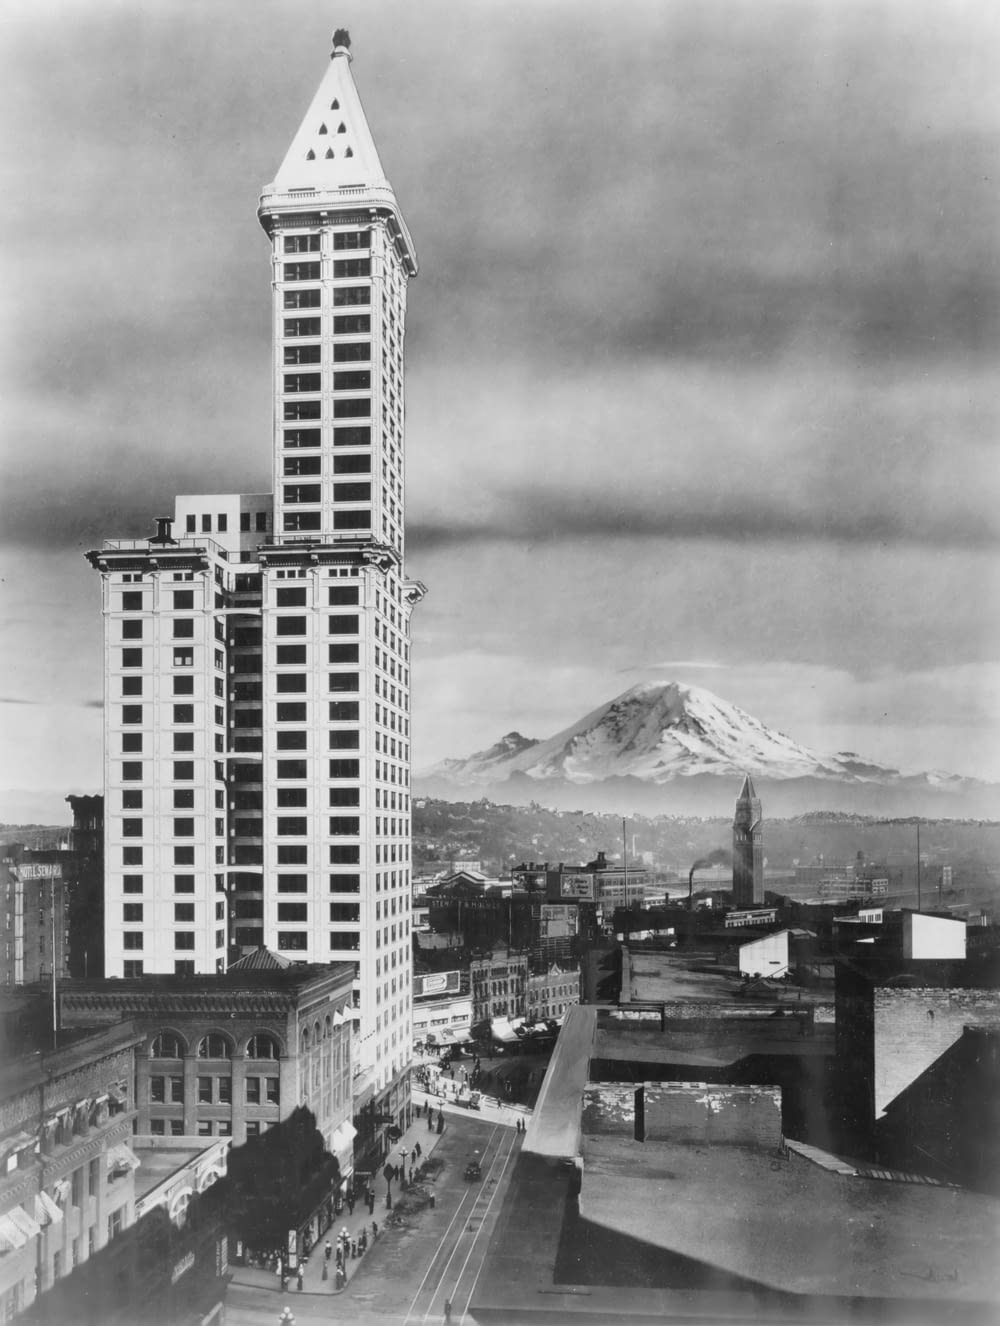 L.C. Smith Building (Pioneer Building), Seattle, Washington, with Mount Rainier in the background